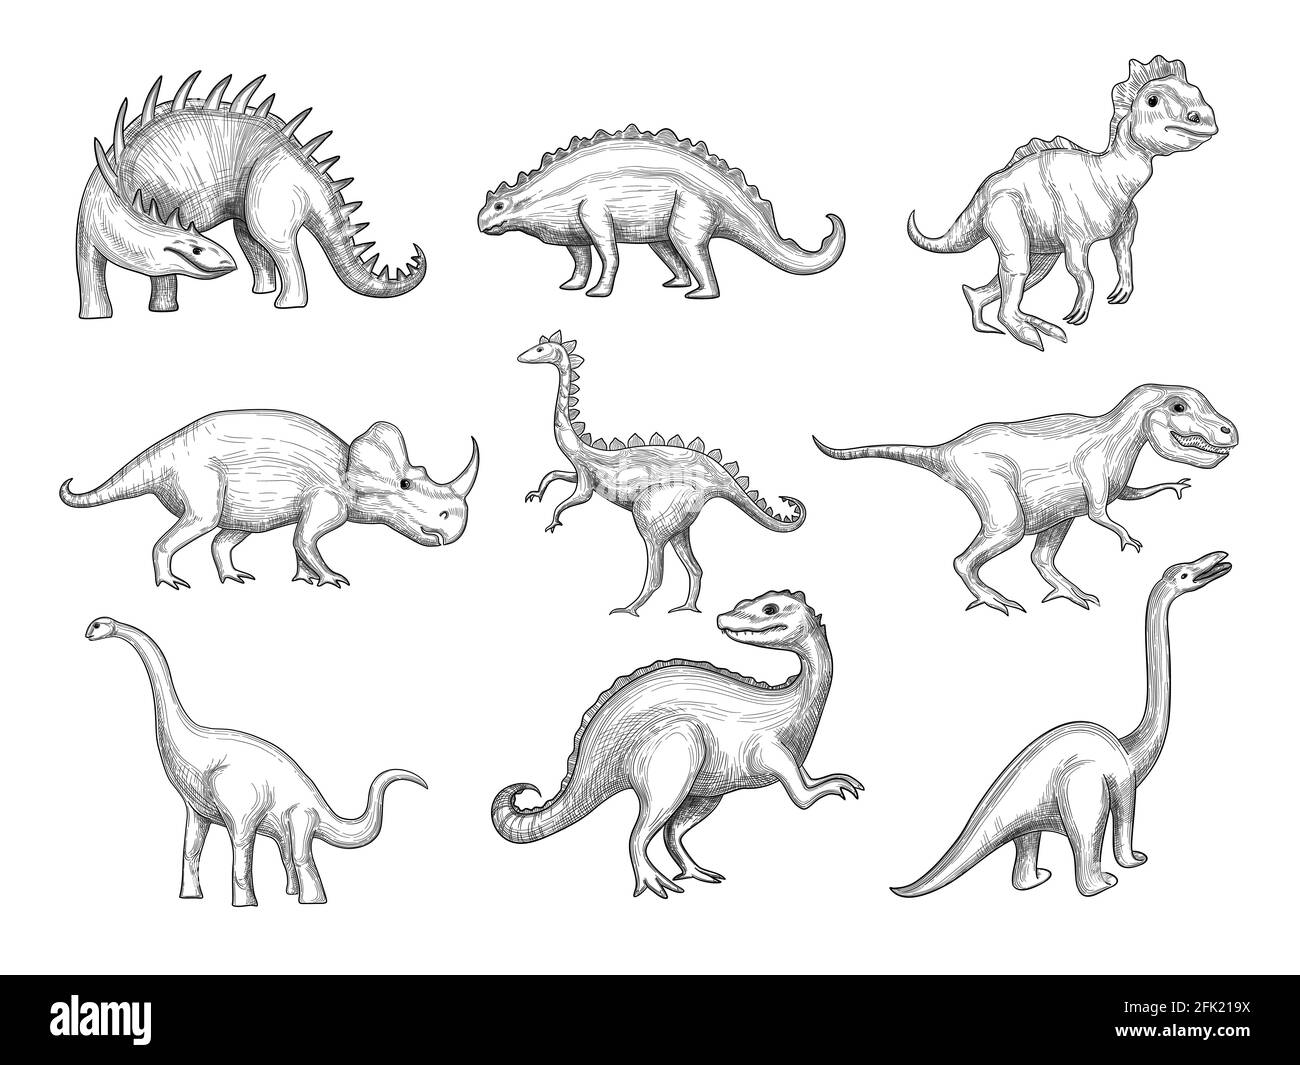 Dinosaurs collection. Extinction wild herbivorous angry animals in paleontology ages vector sketch drawn pictures Stock Vector